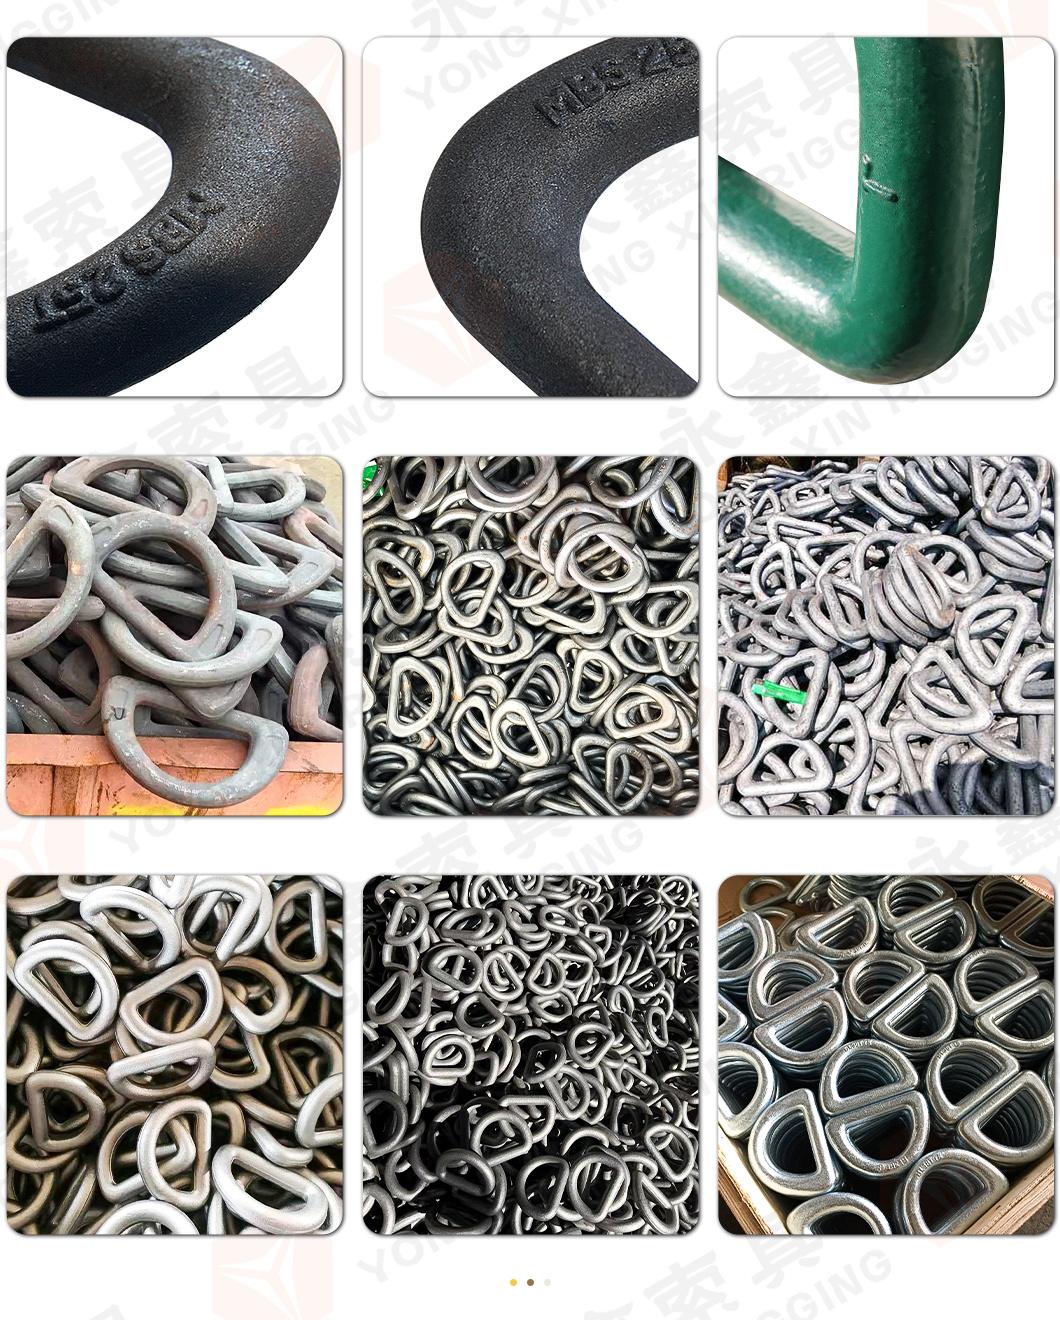 Factory Price Rigging Forged Locks D Ring|Customized Forged D Ring JIS Type